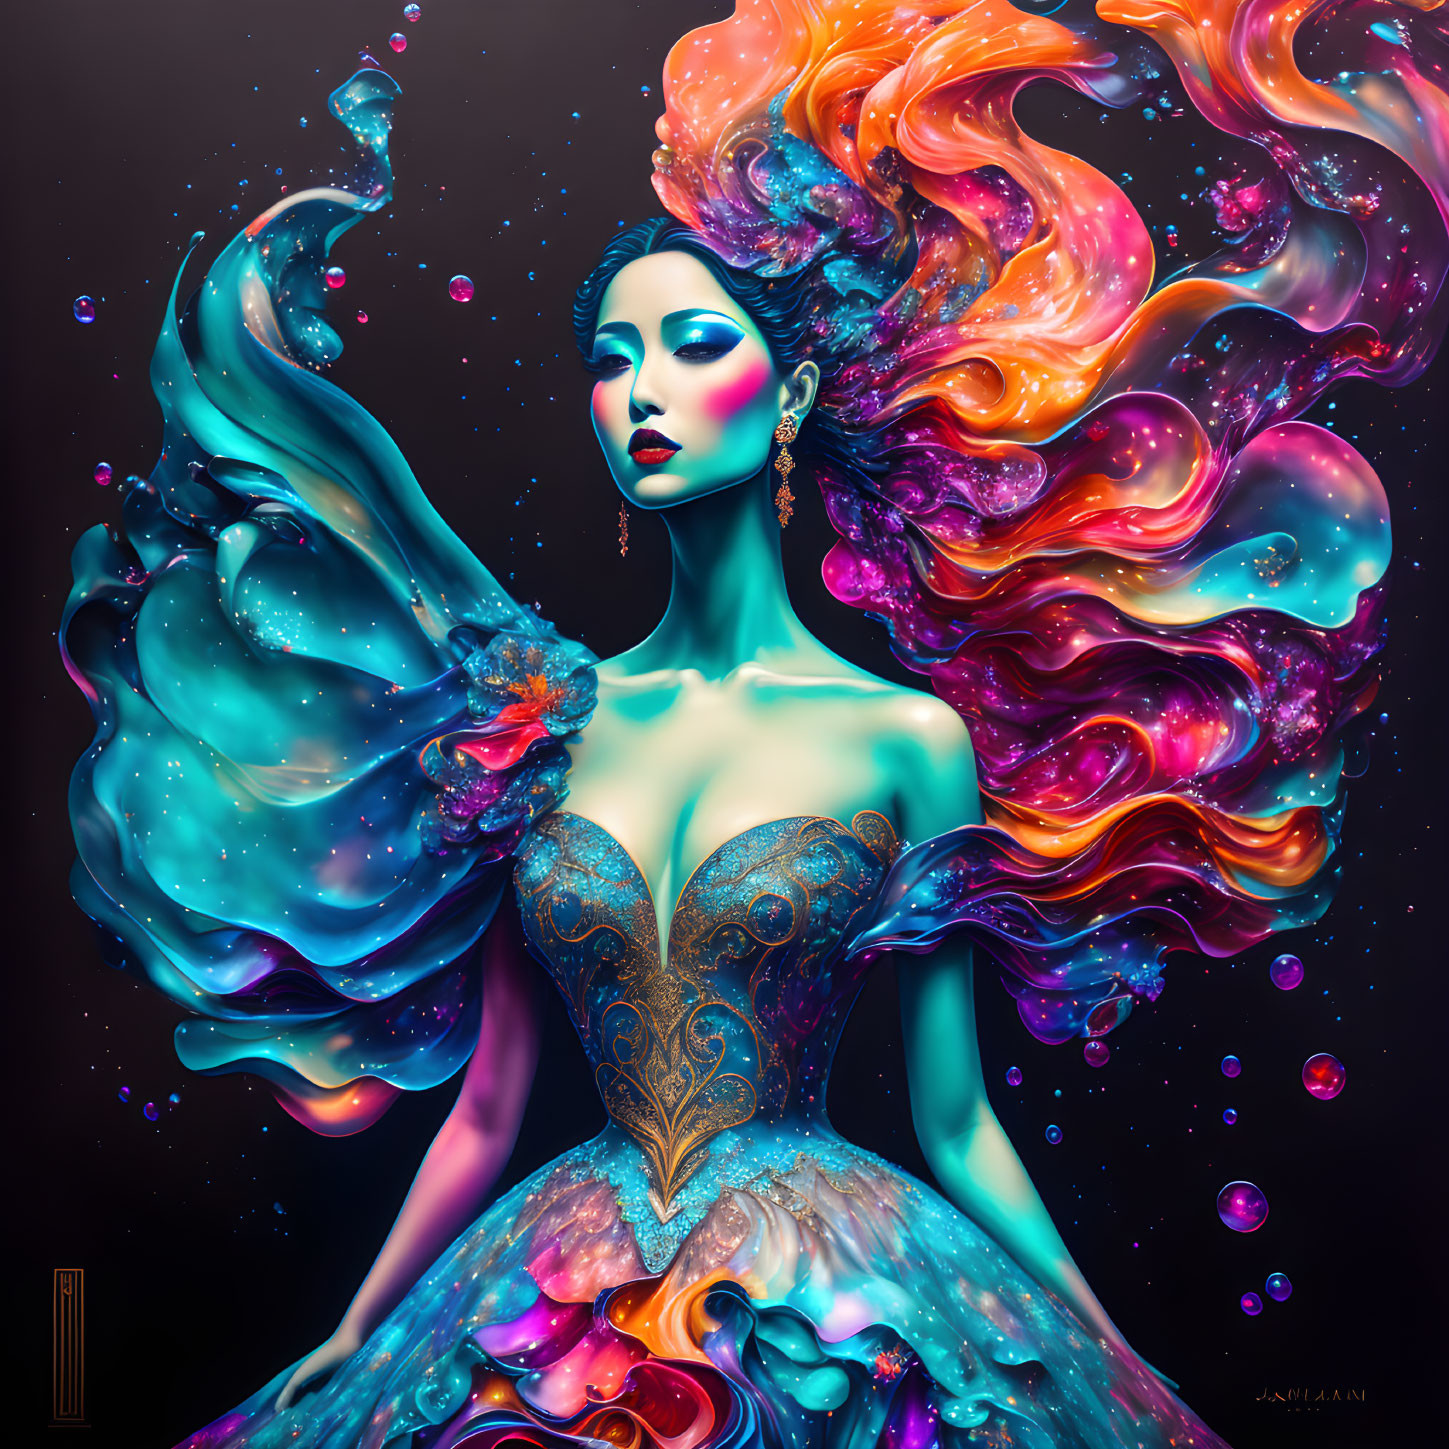 Colorful Illustration of Woman with Multicolored Hair and Cosmic Dress